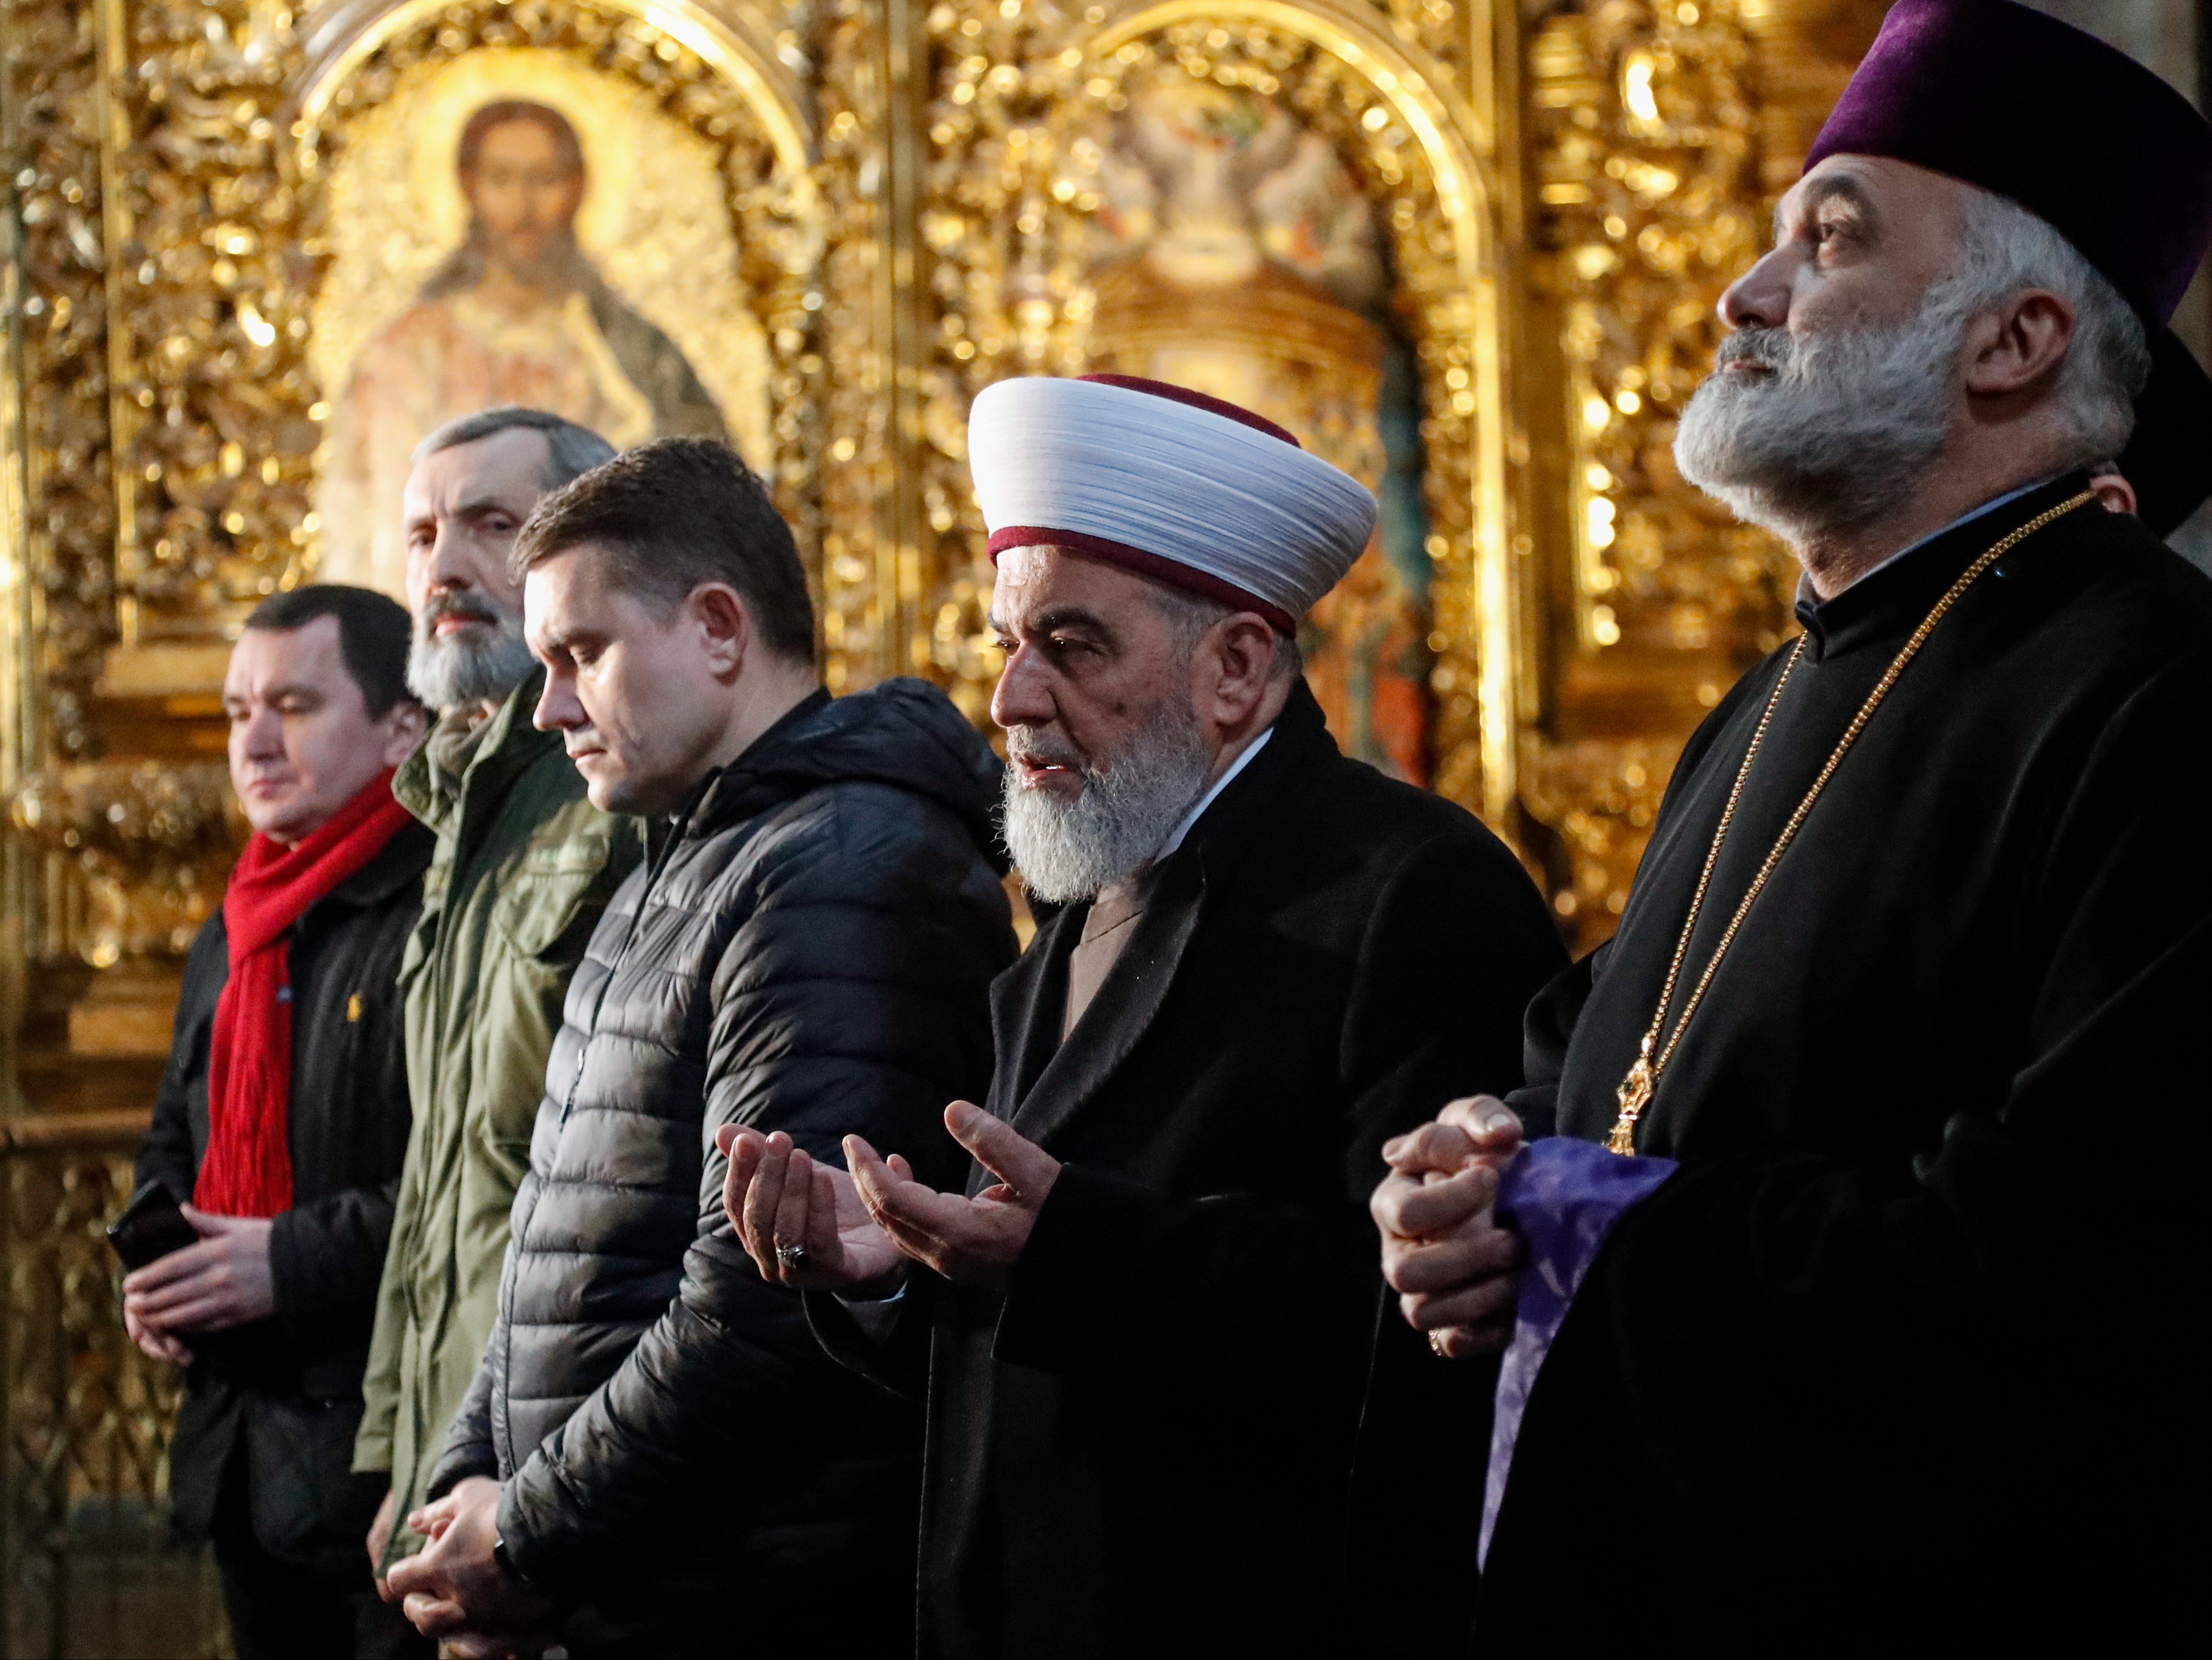 Prayers in the ancient St Sophia Cathedral in Kyiv